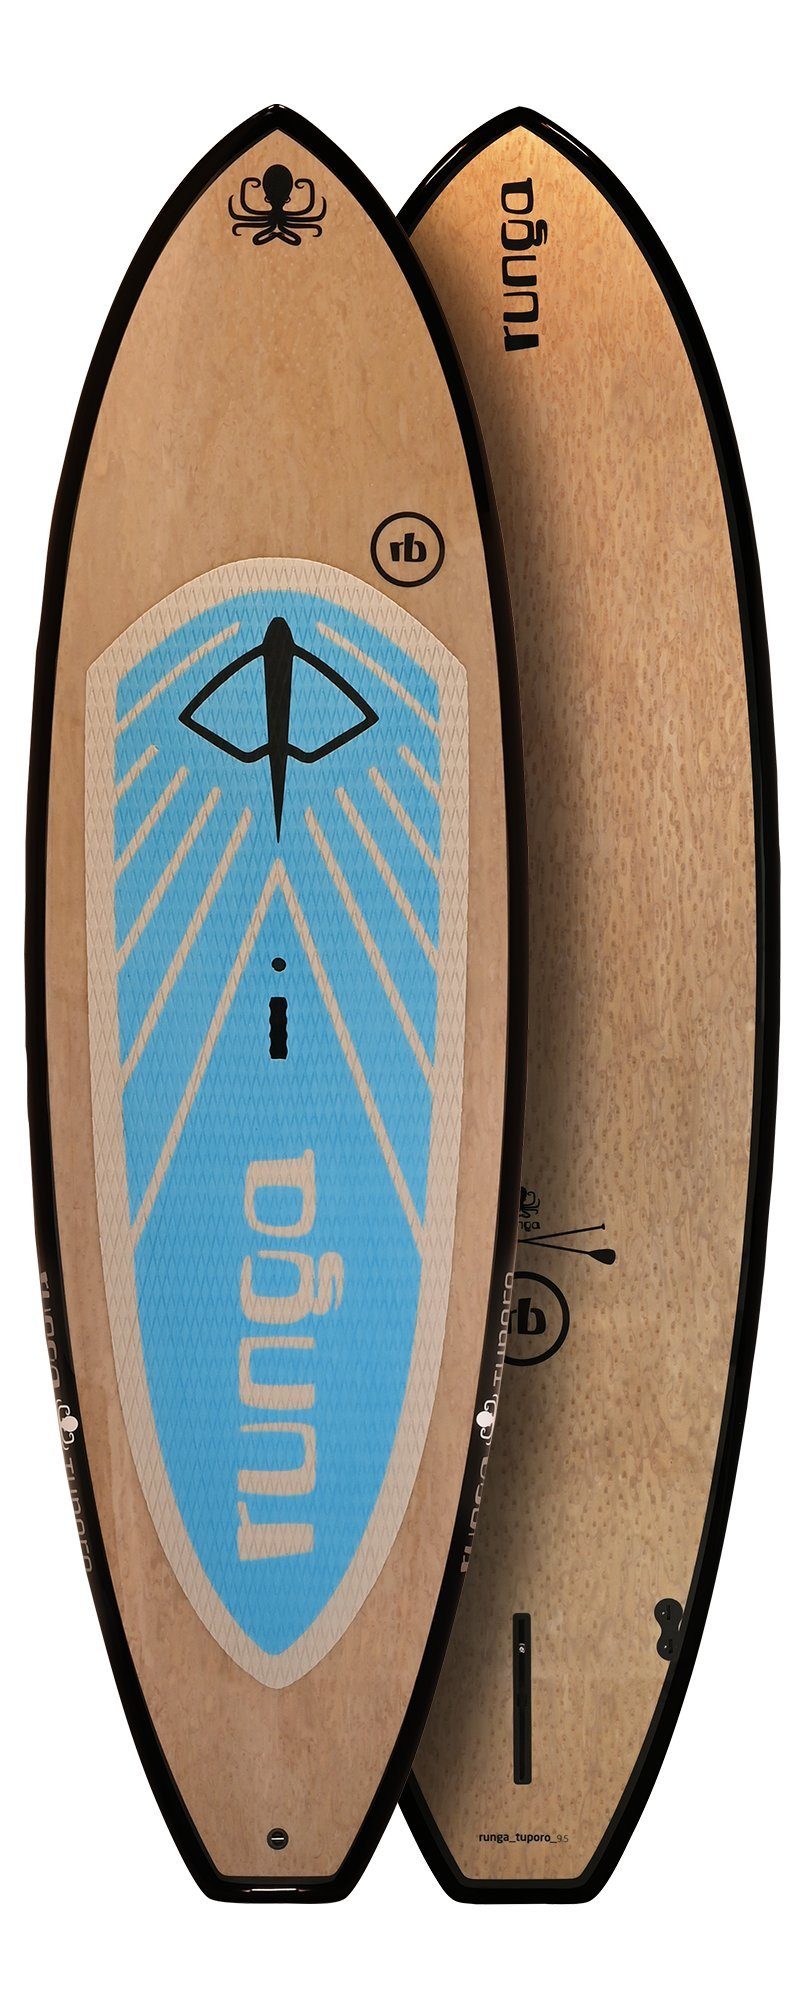 Runga-Boards SUP-Board Runga TUPORO BLUE 3-tlg. Stand Lash Up Board (10.0, Paddling inkl. Coiled Hard & SUP, Finnen-Set)